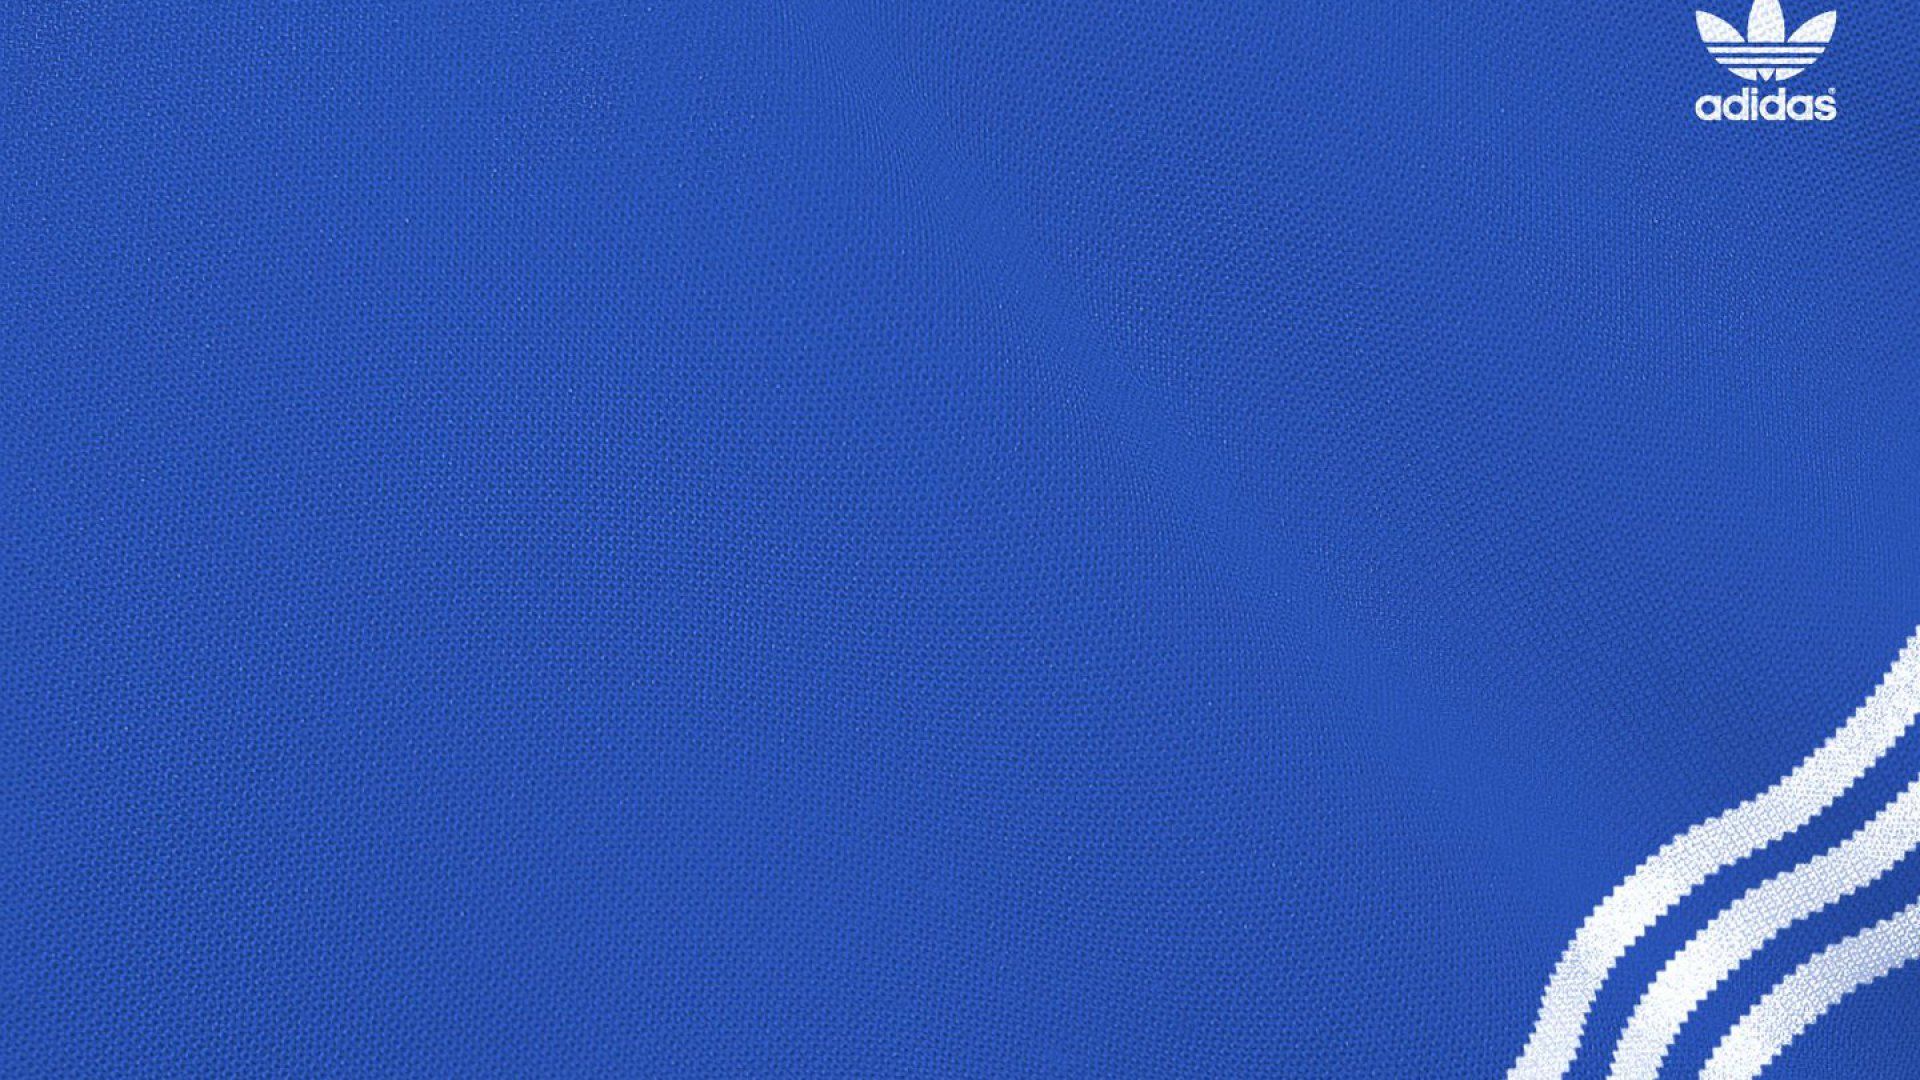 Of Wallpapers Images Adidas Blue 